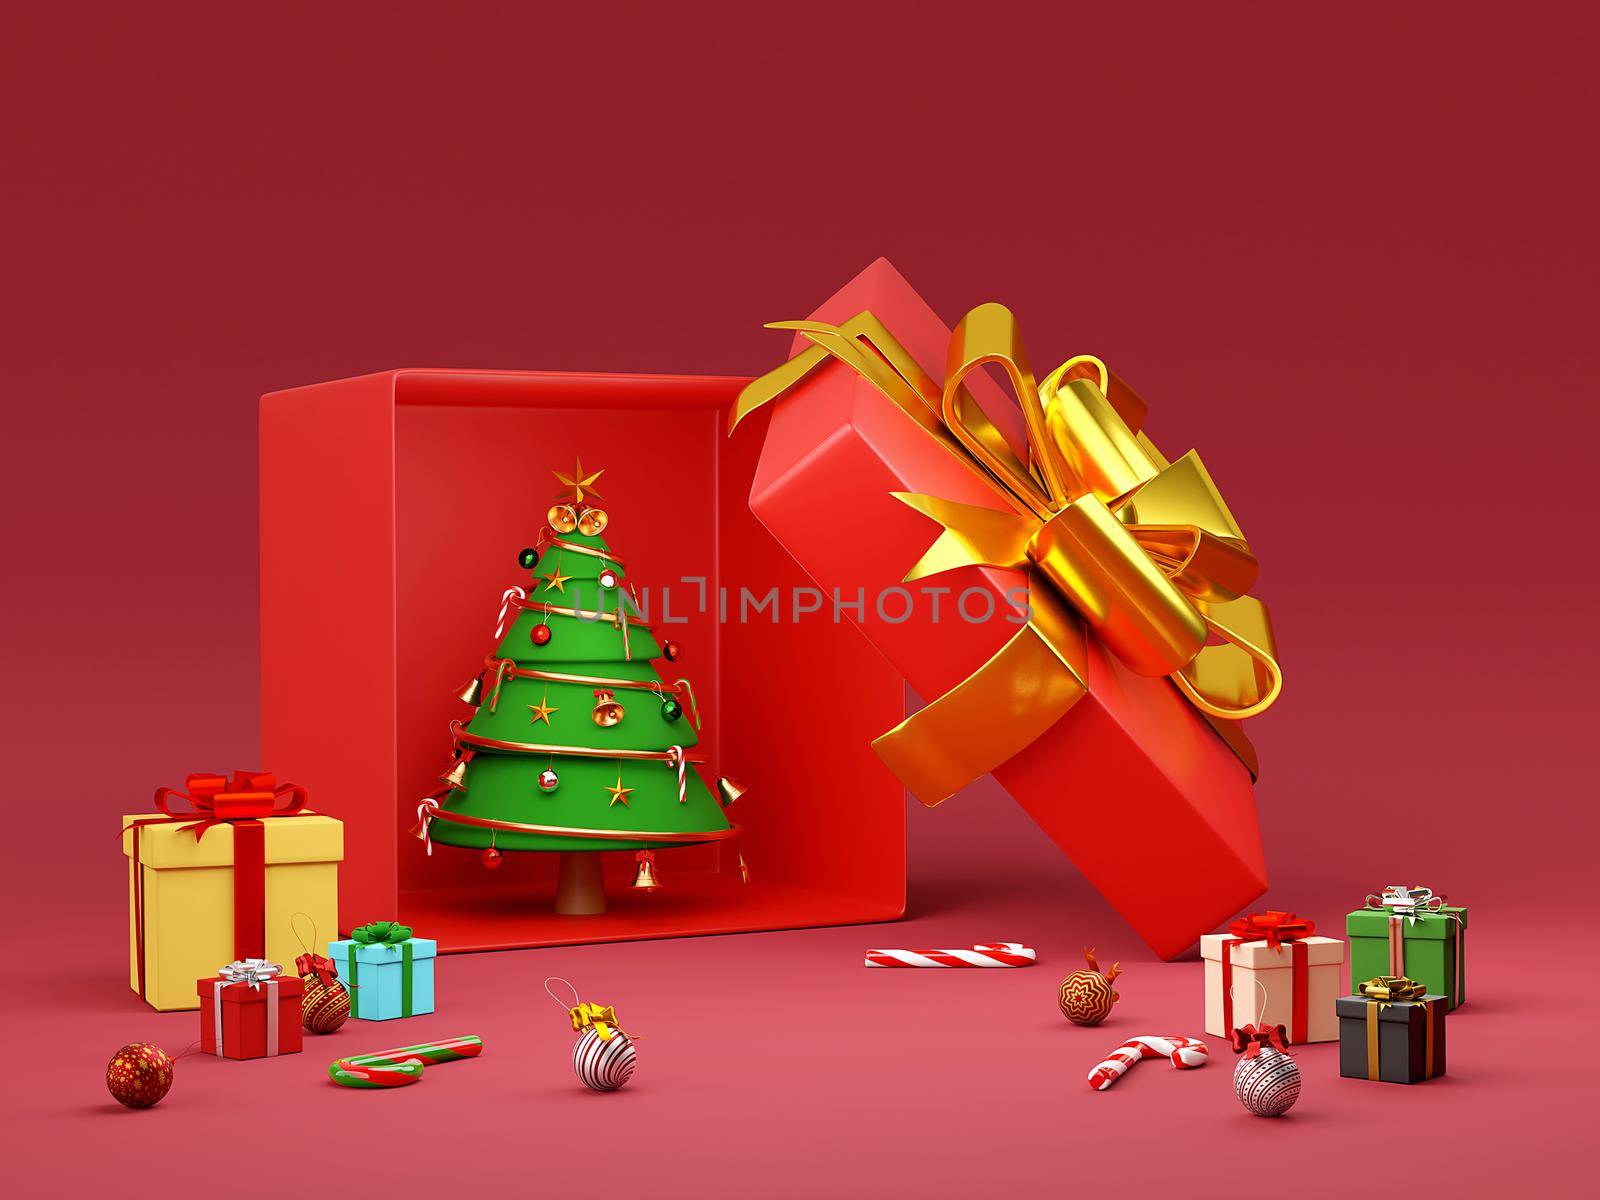 Merry Christmas and Happy New Year, Christmas tree in gift box with Christmas ornament, 3d rendering